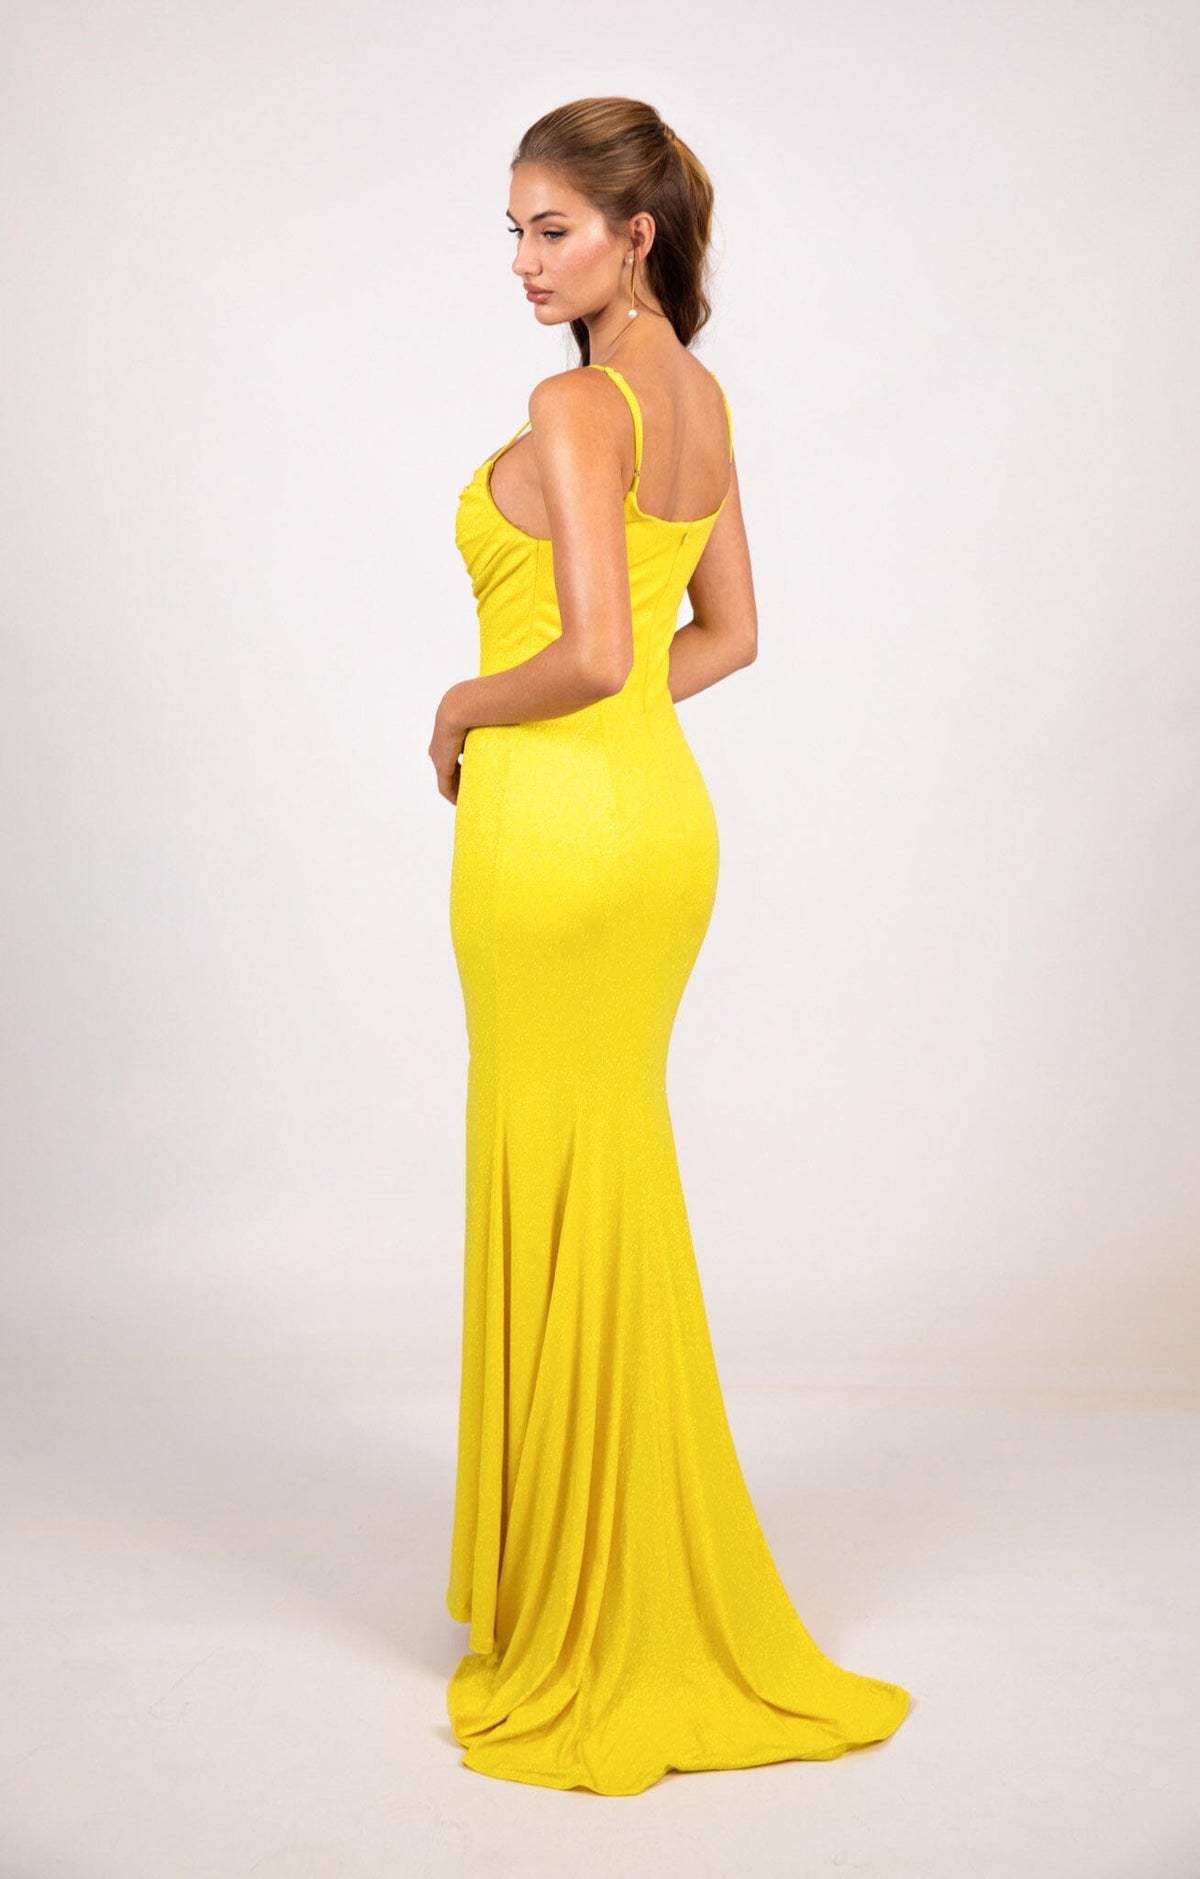 Yellow Fitted Evening Gown with Cowl Neckline, Side Split, Thin Shoulder Straps and Small Train